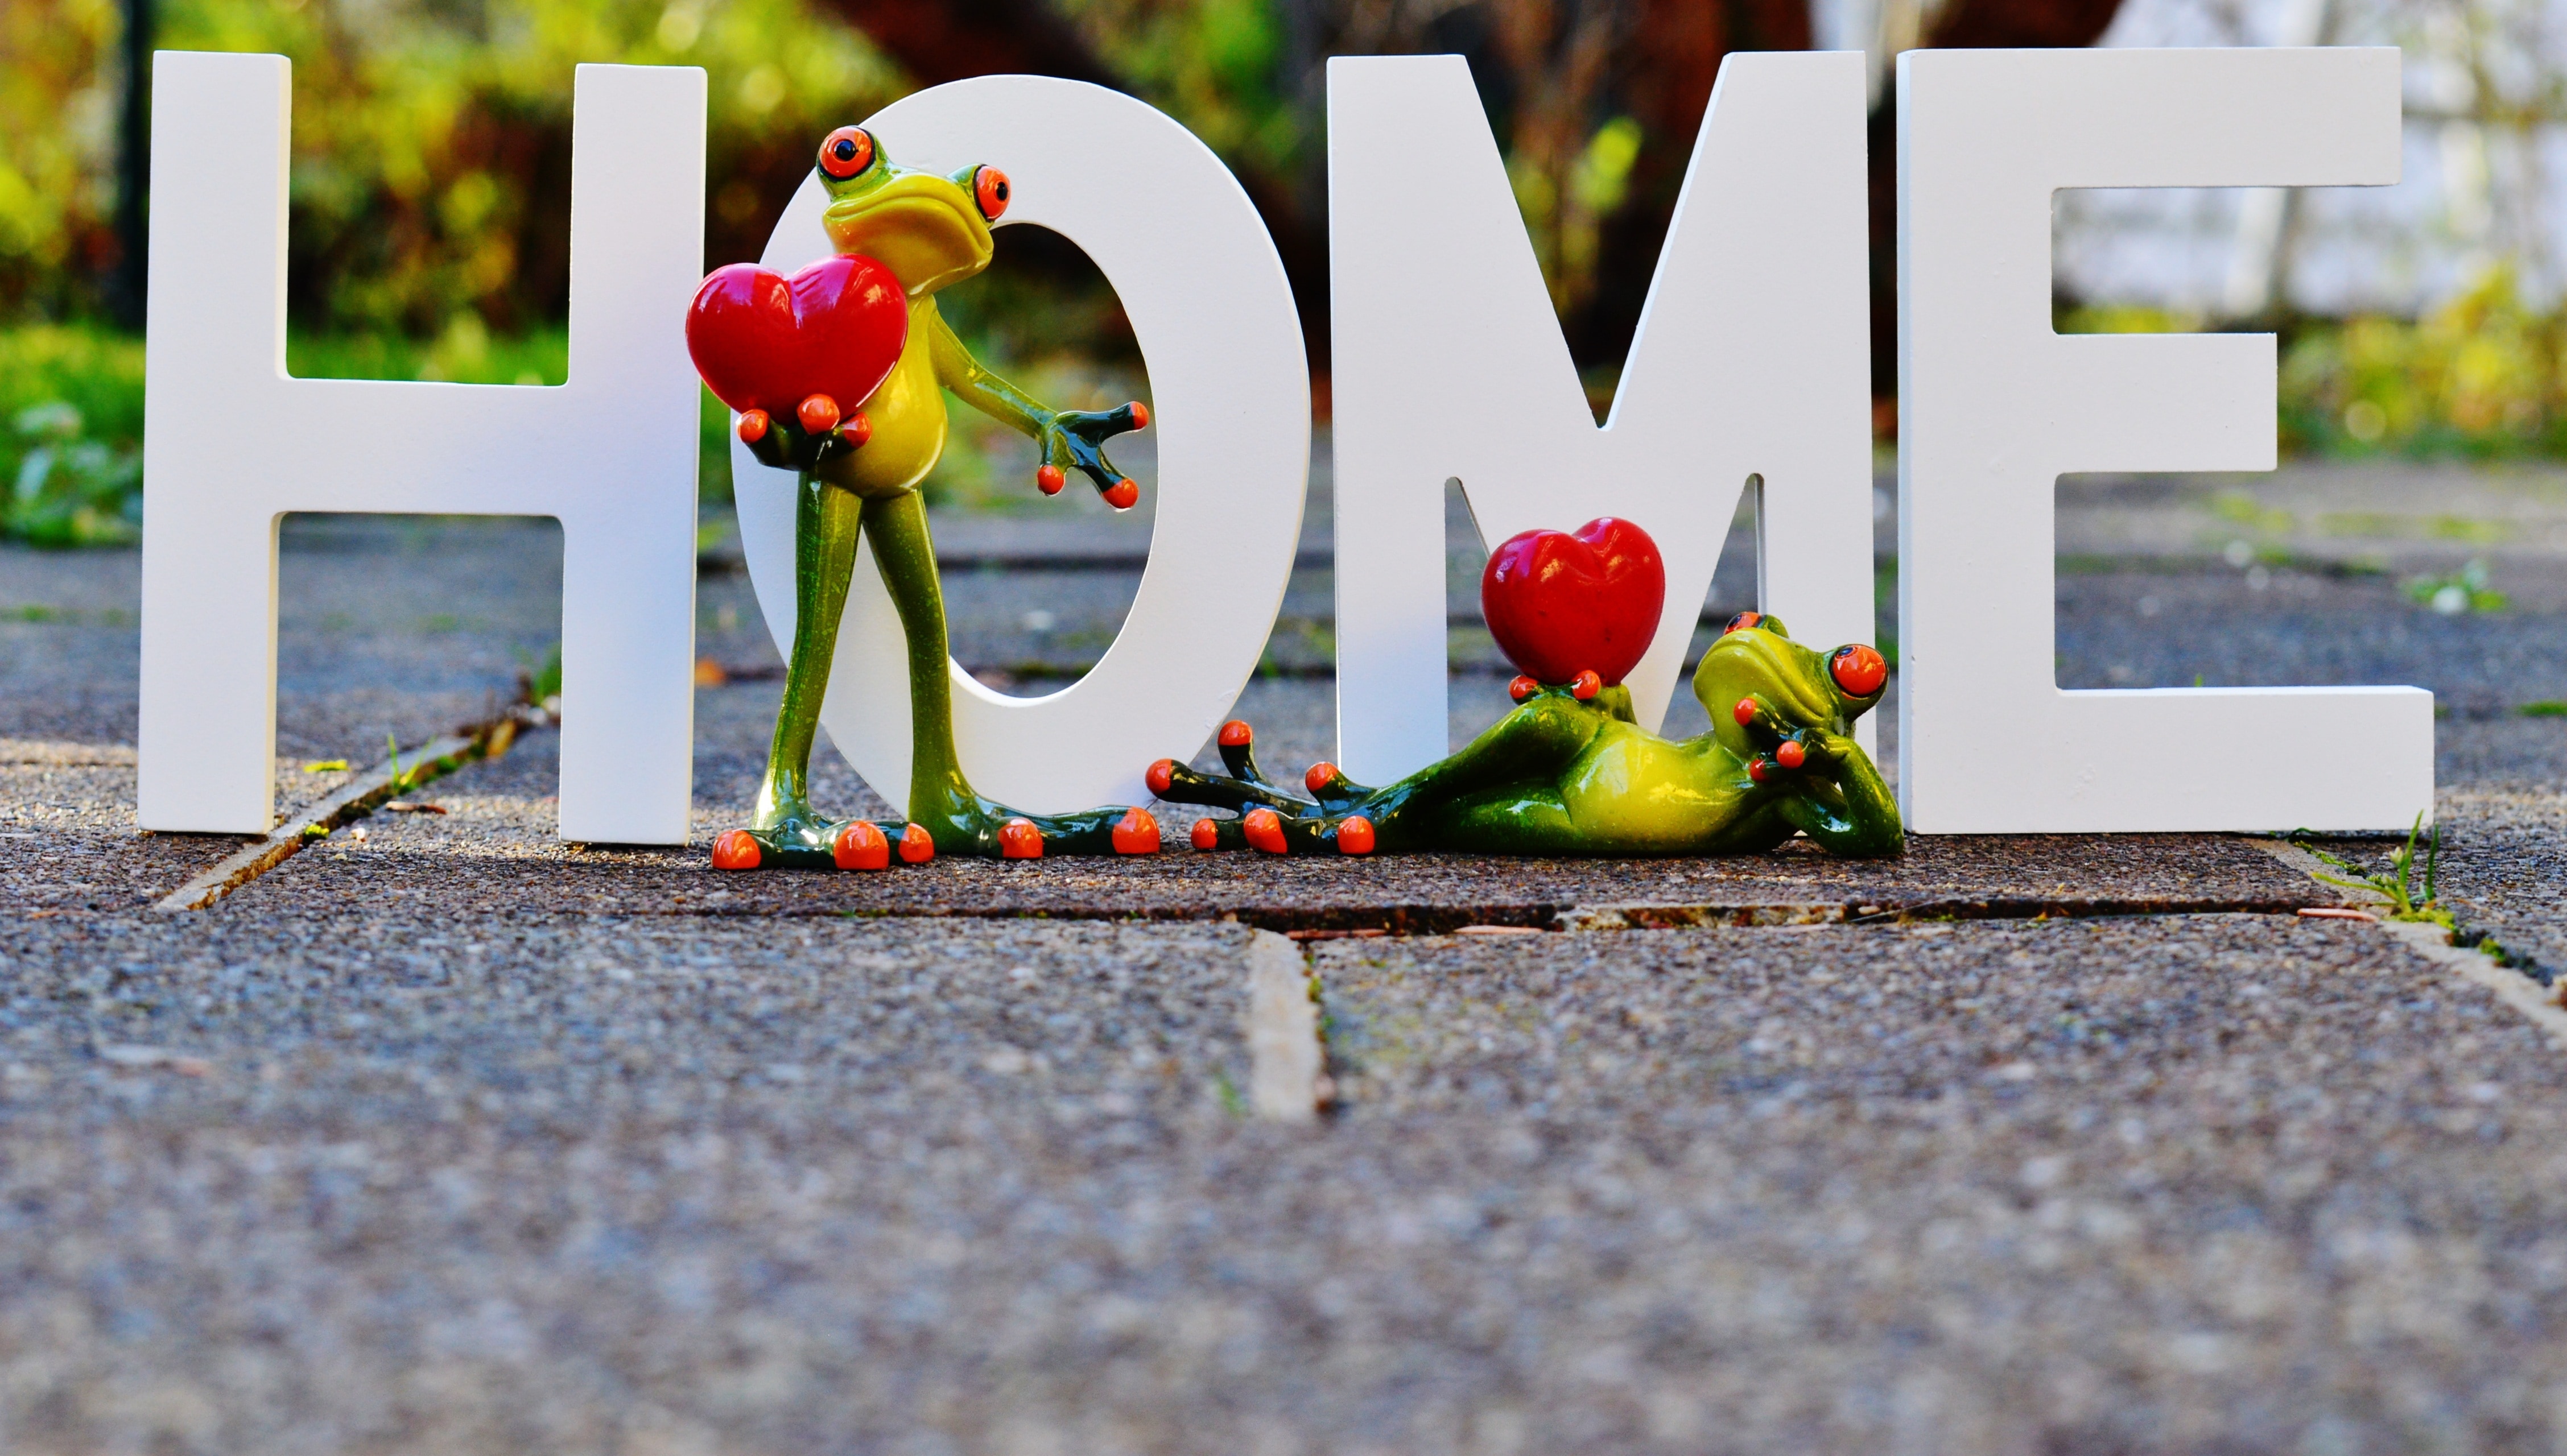 Lettering, Love, At Home, Frogs, Romance, toy, day